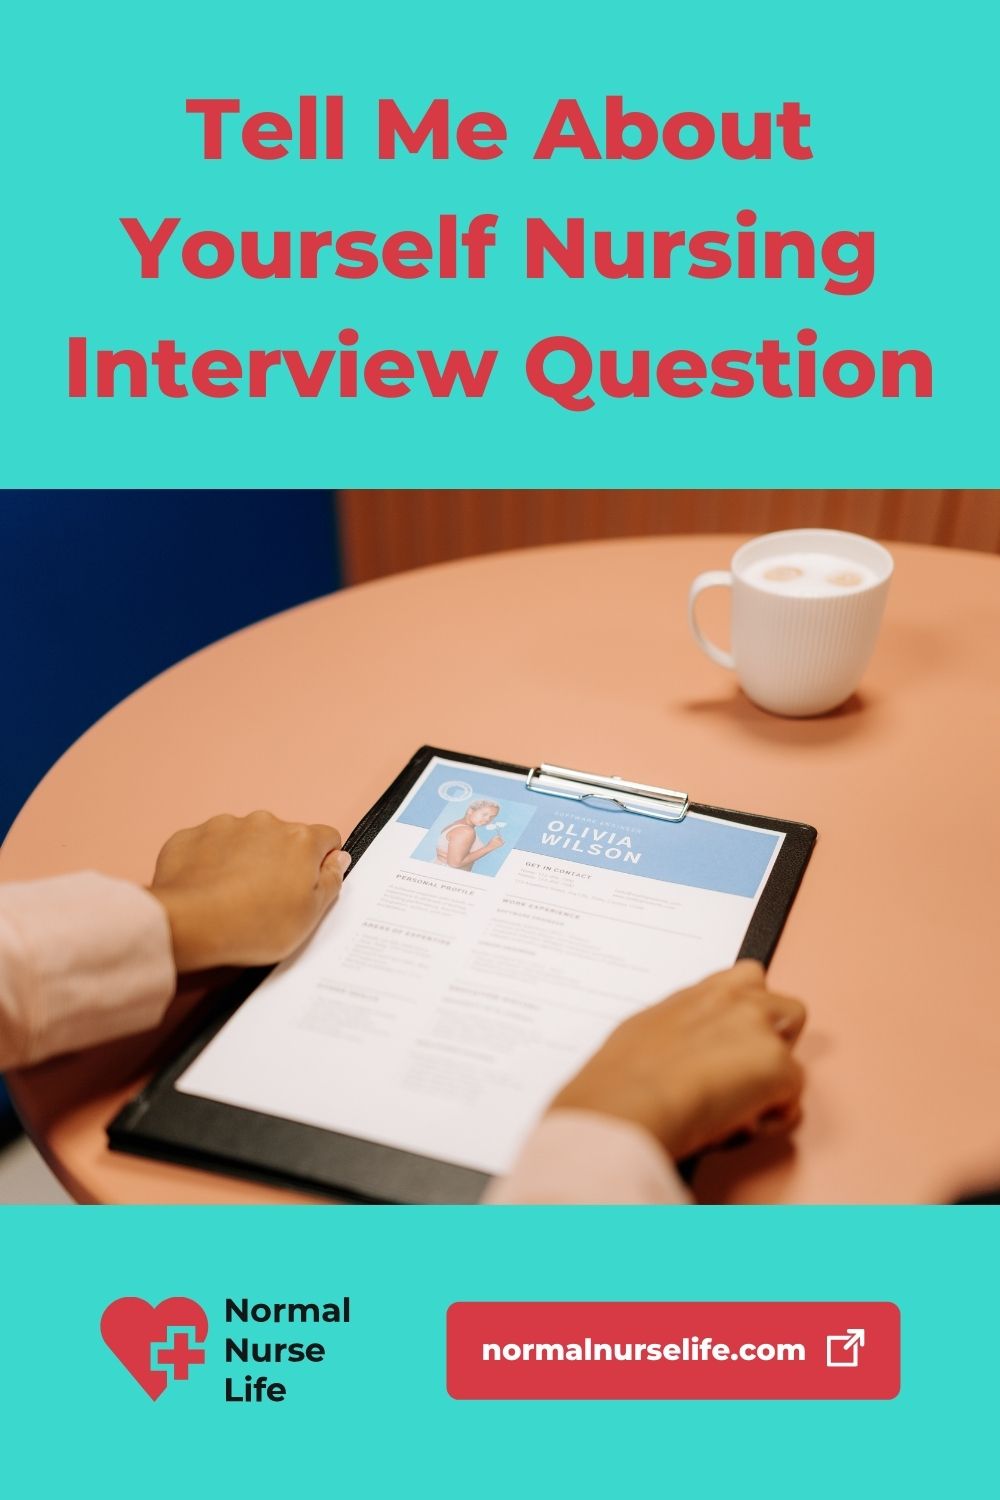 Tell me about yourself nursing interview question